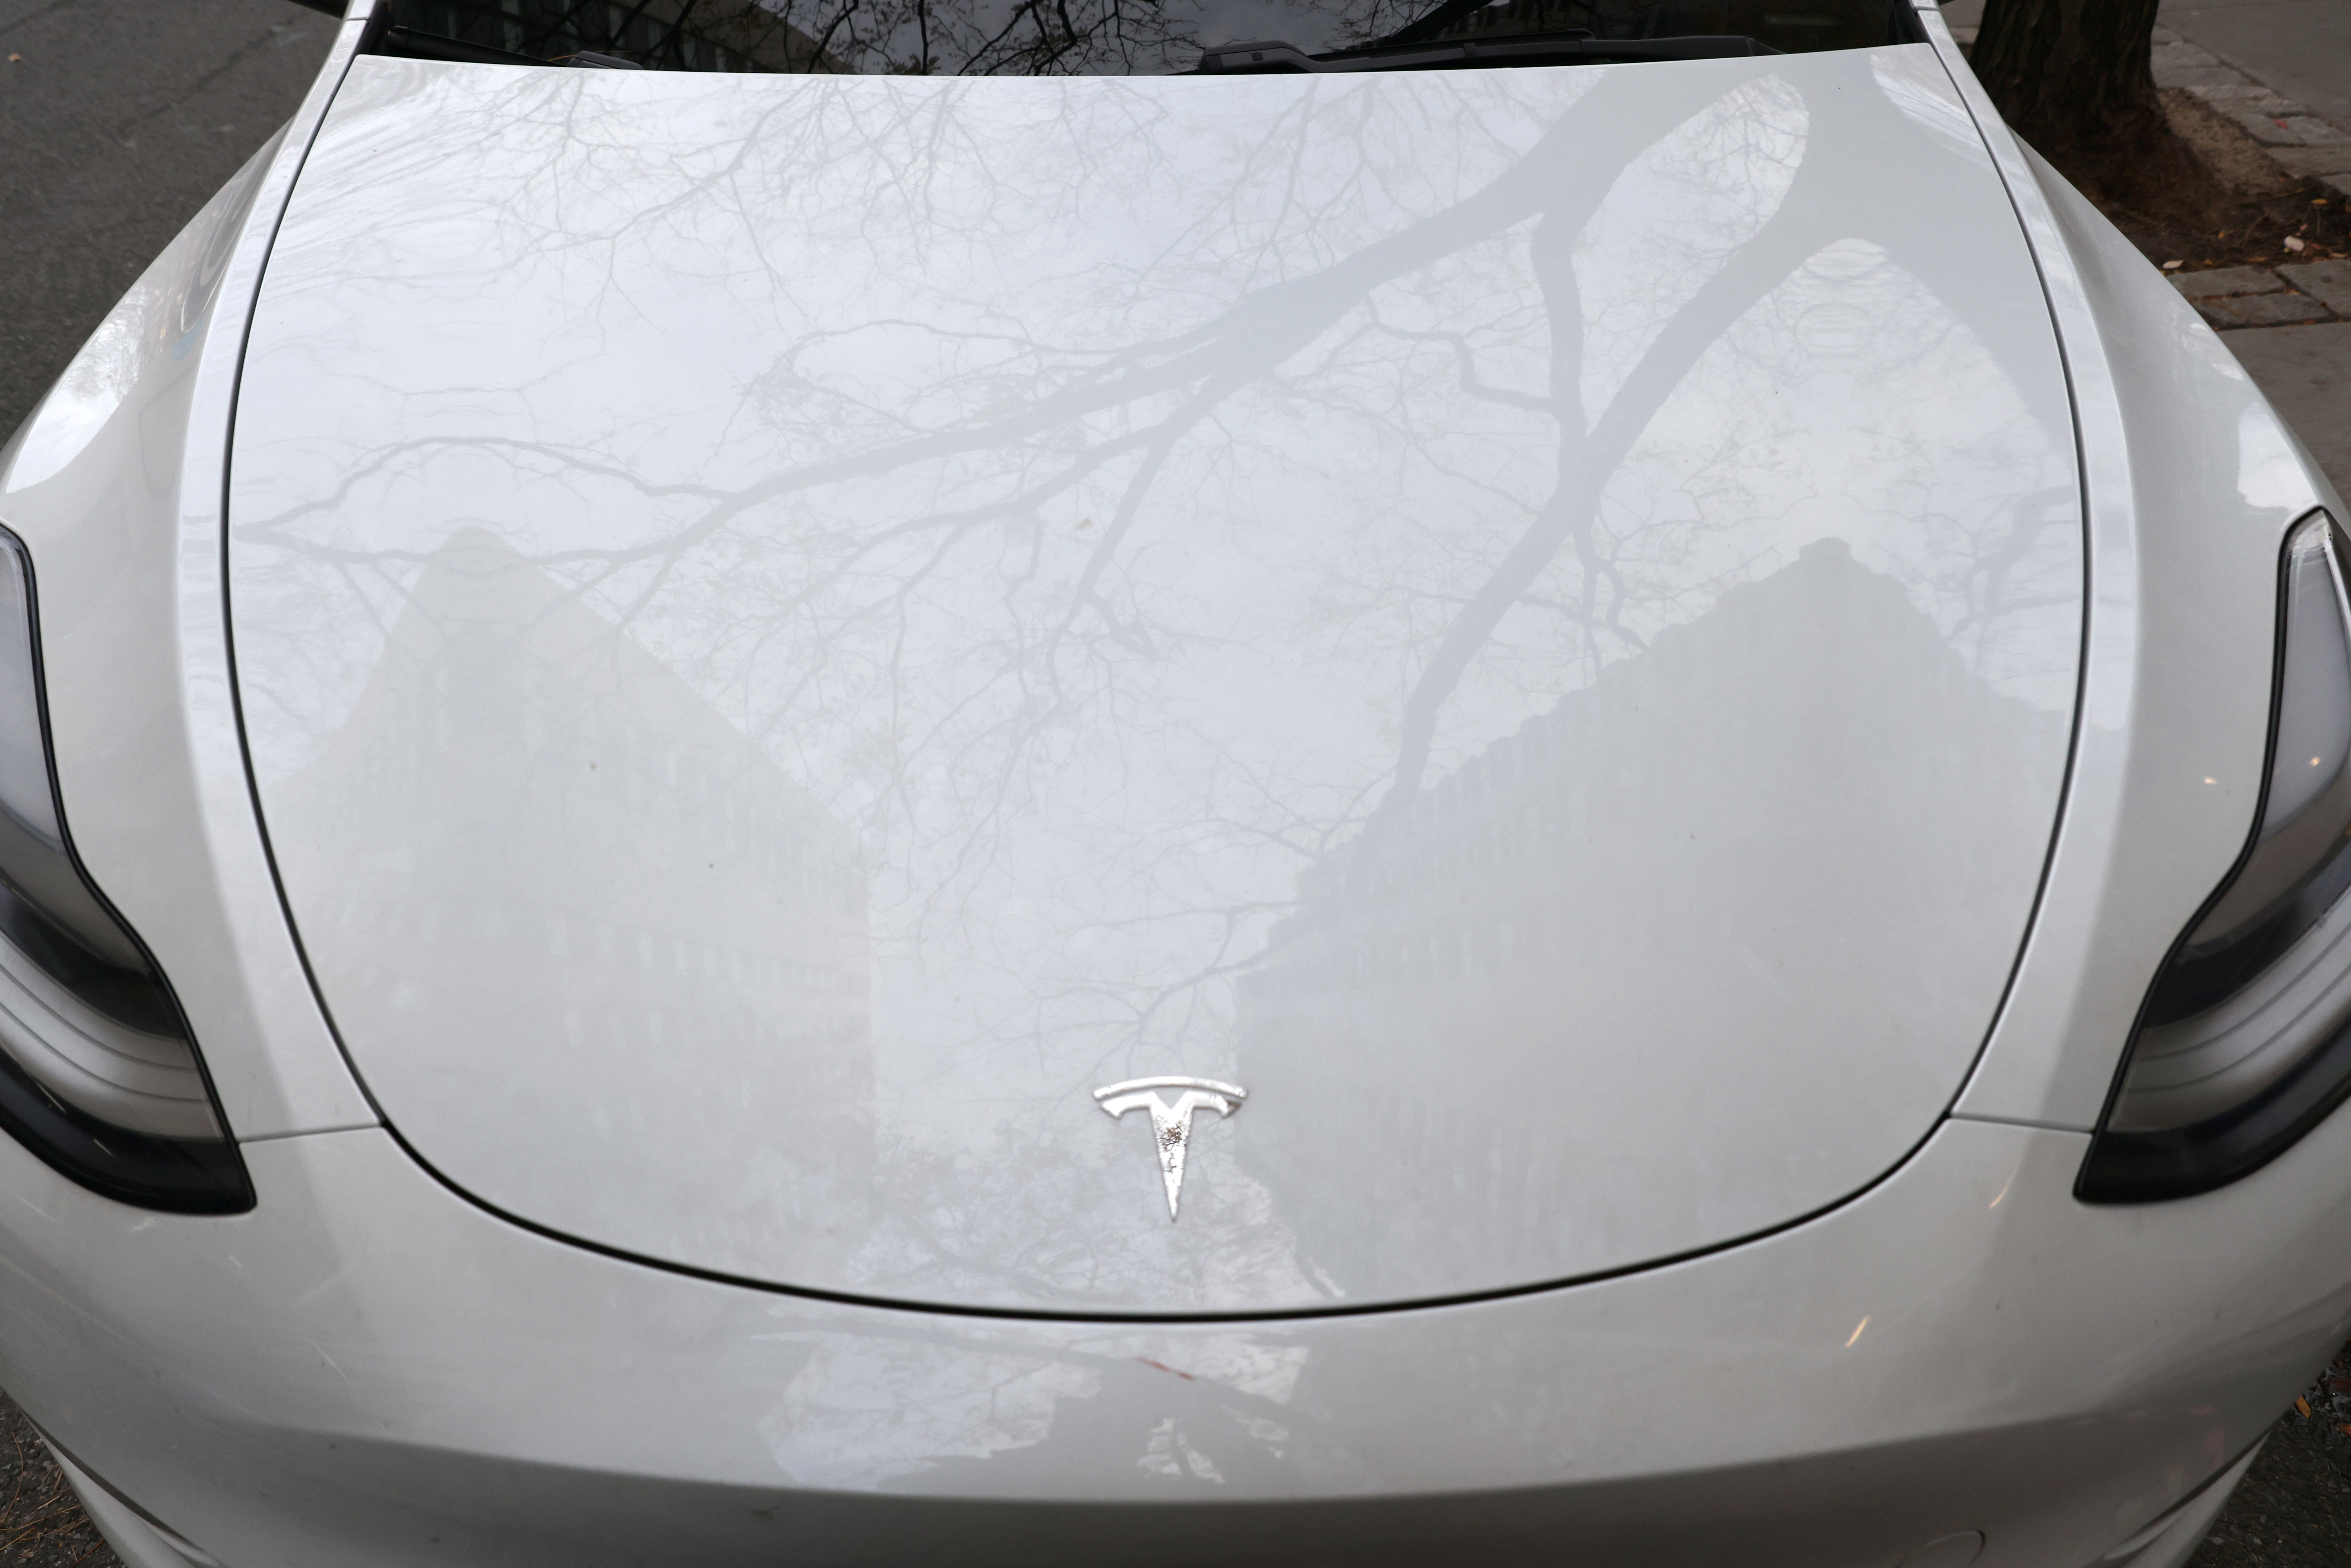 A Tesla electric vehicle is seen in Manhattan, New York, U.S., December 7, 2021. REUTERS/Andrew Kelly/File Photo